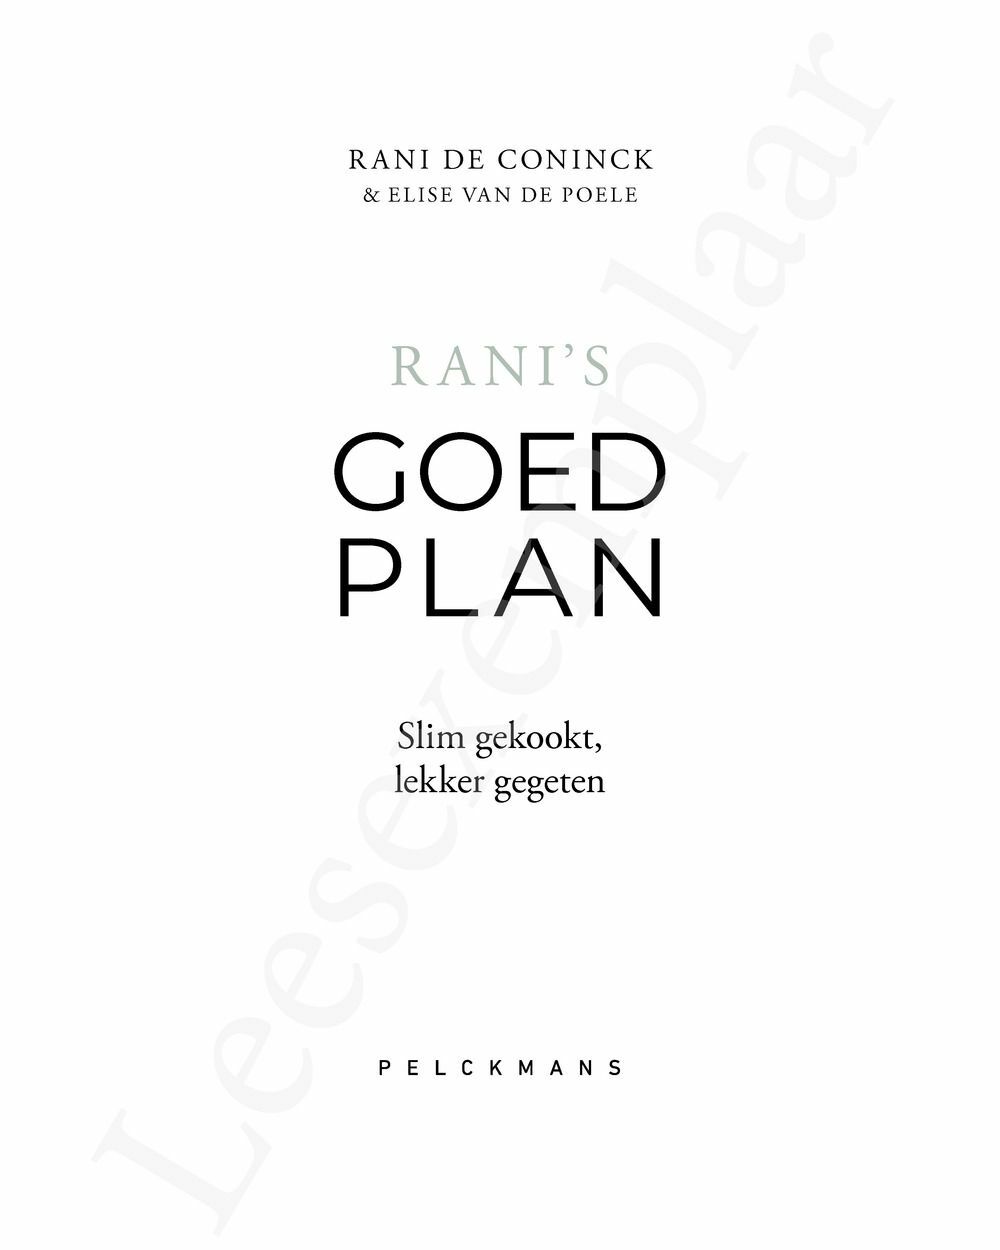 Preview: Rani's goed plan